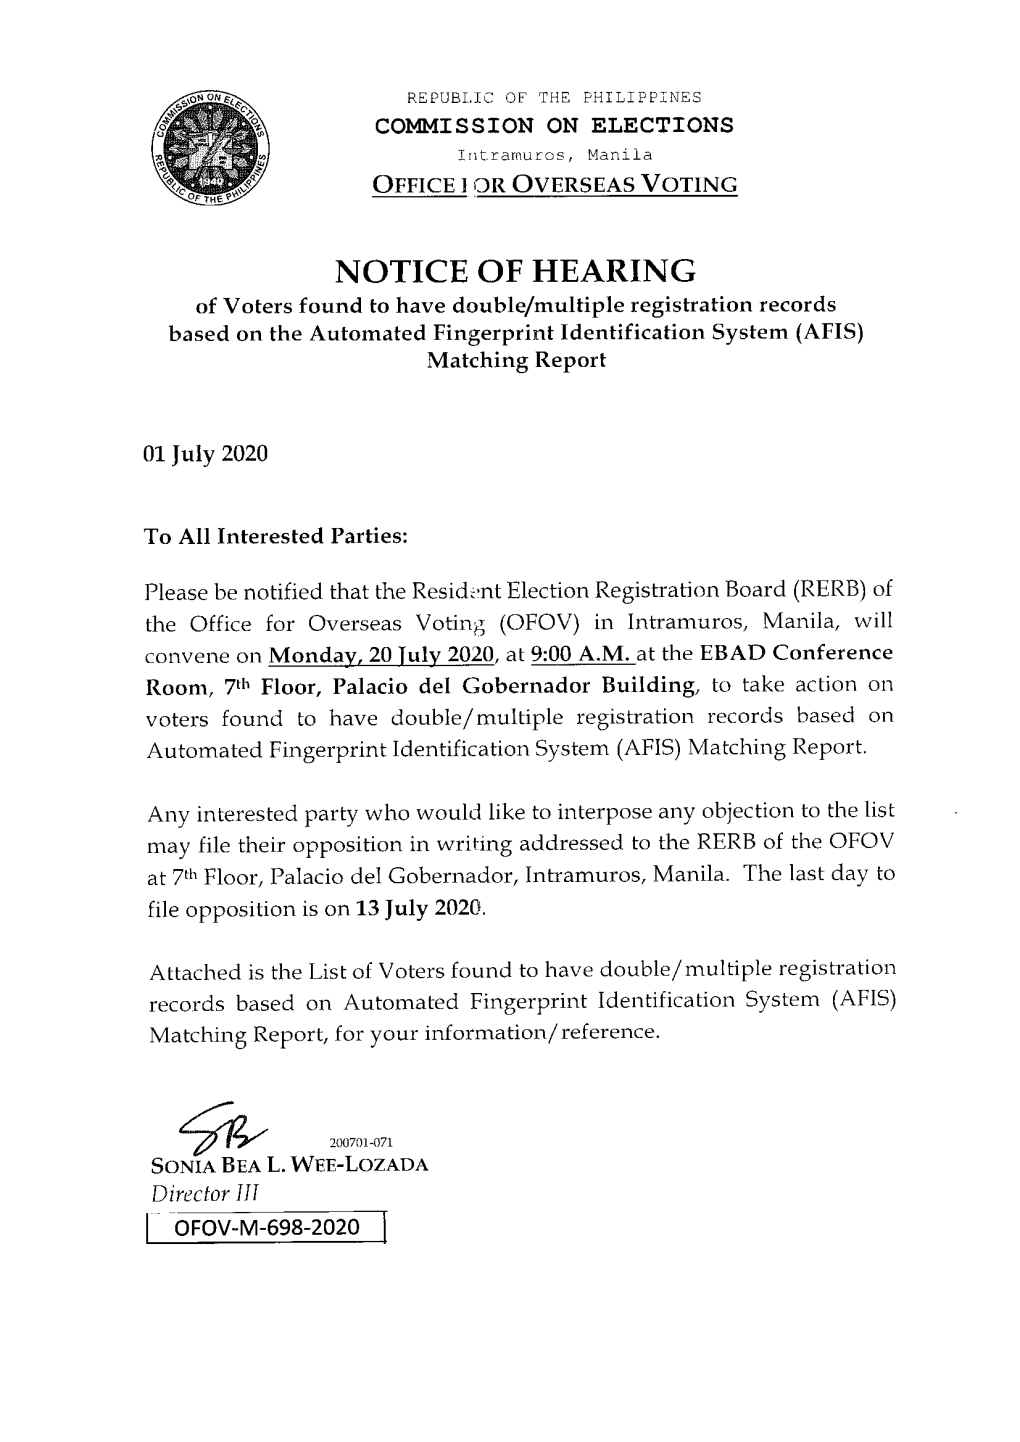 Notice of Hearing of Voters Found to Have Double